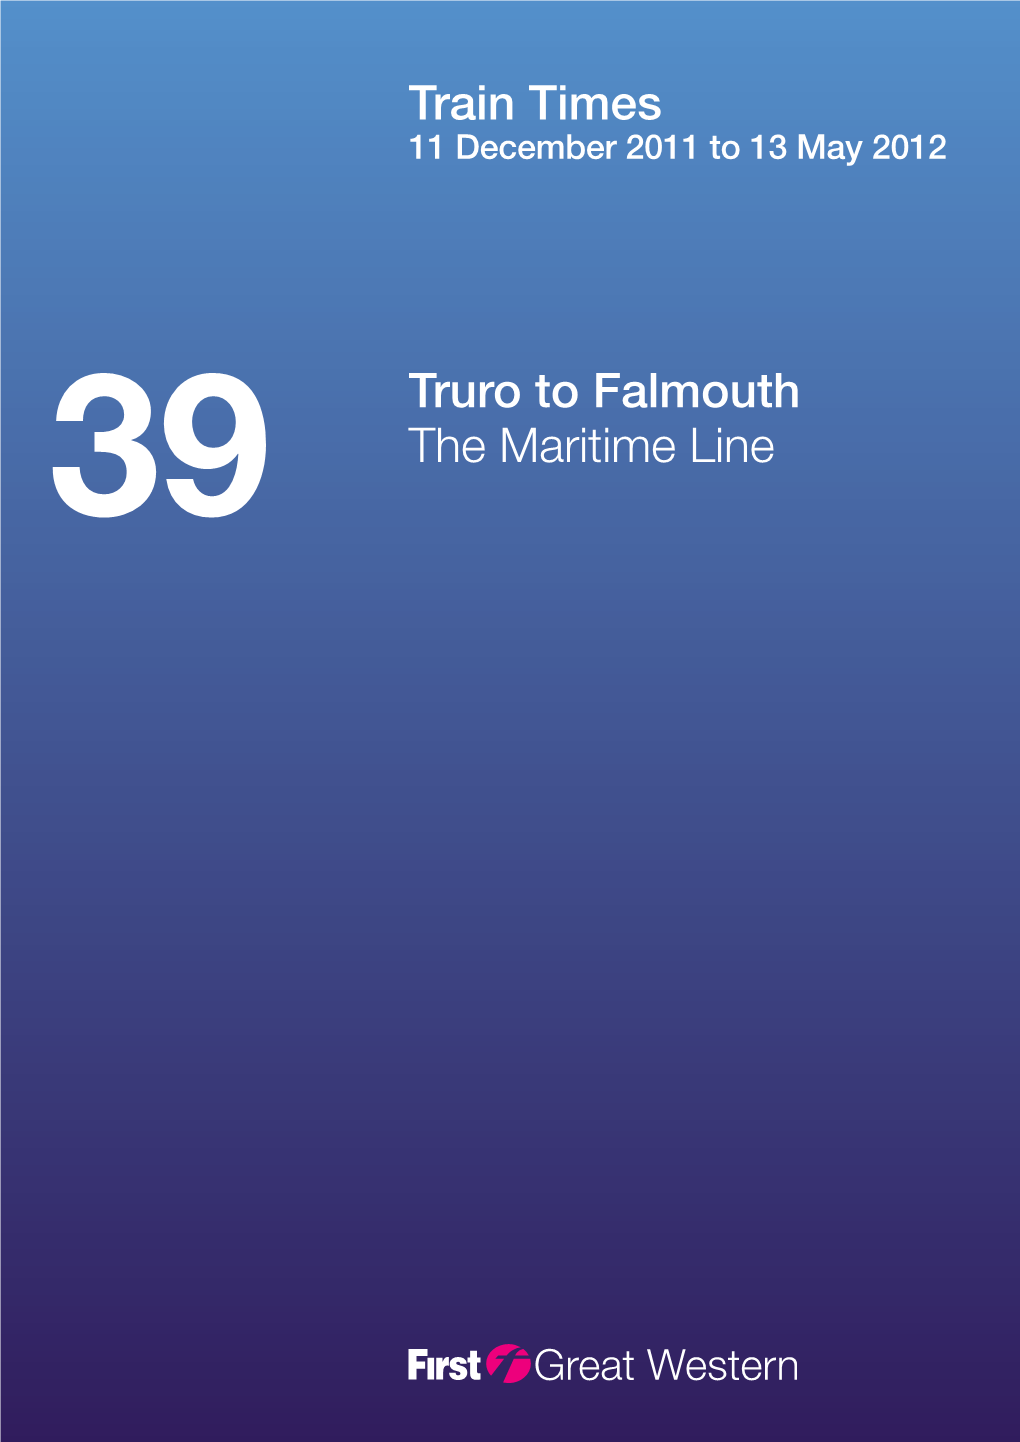 Truro to Falmouth the Maritime Line Train Times